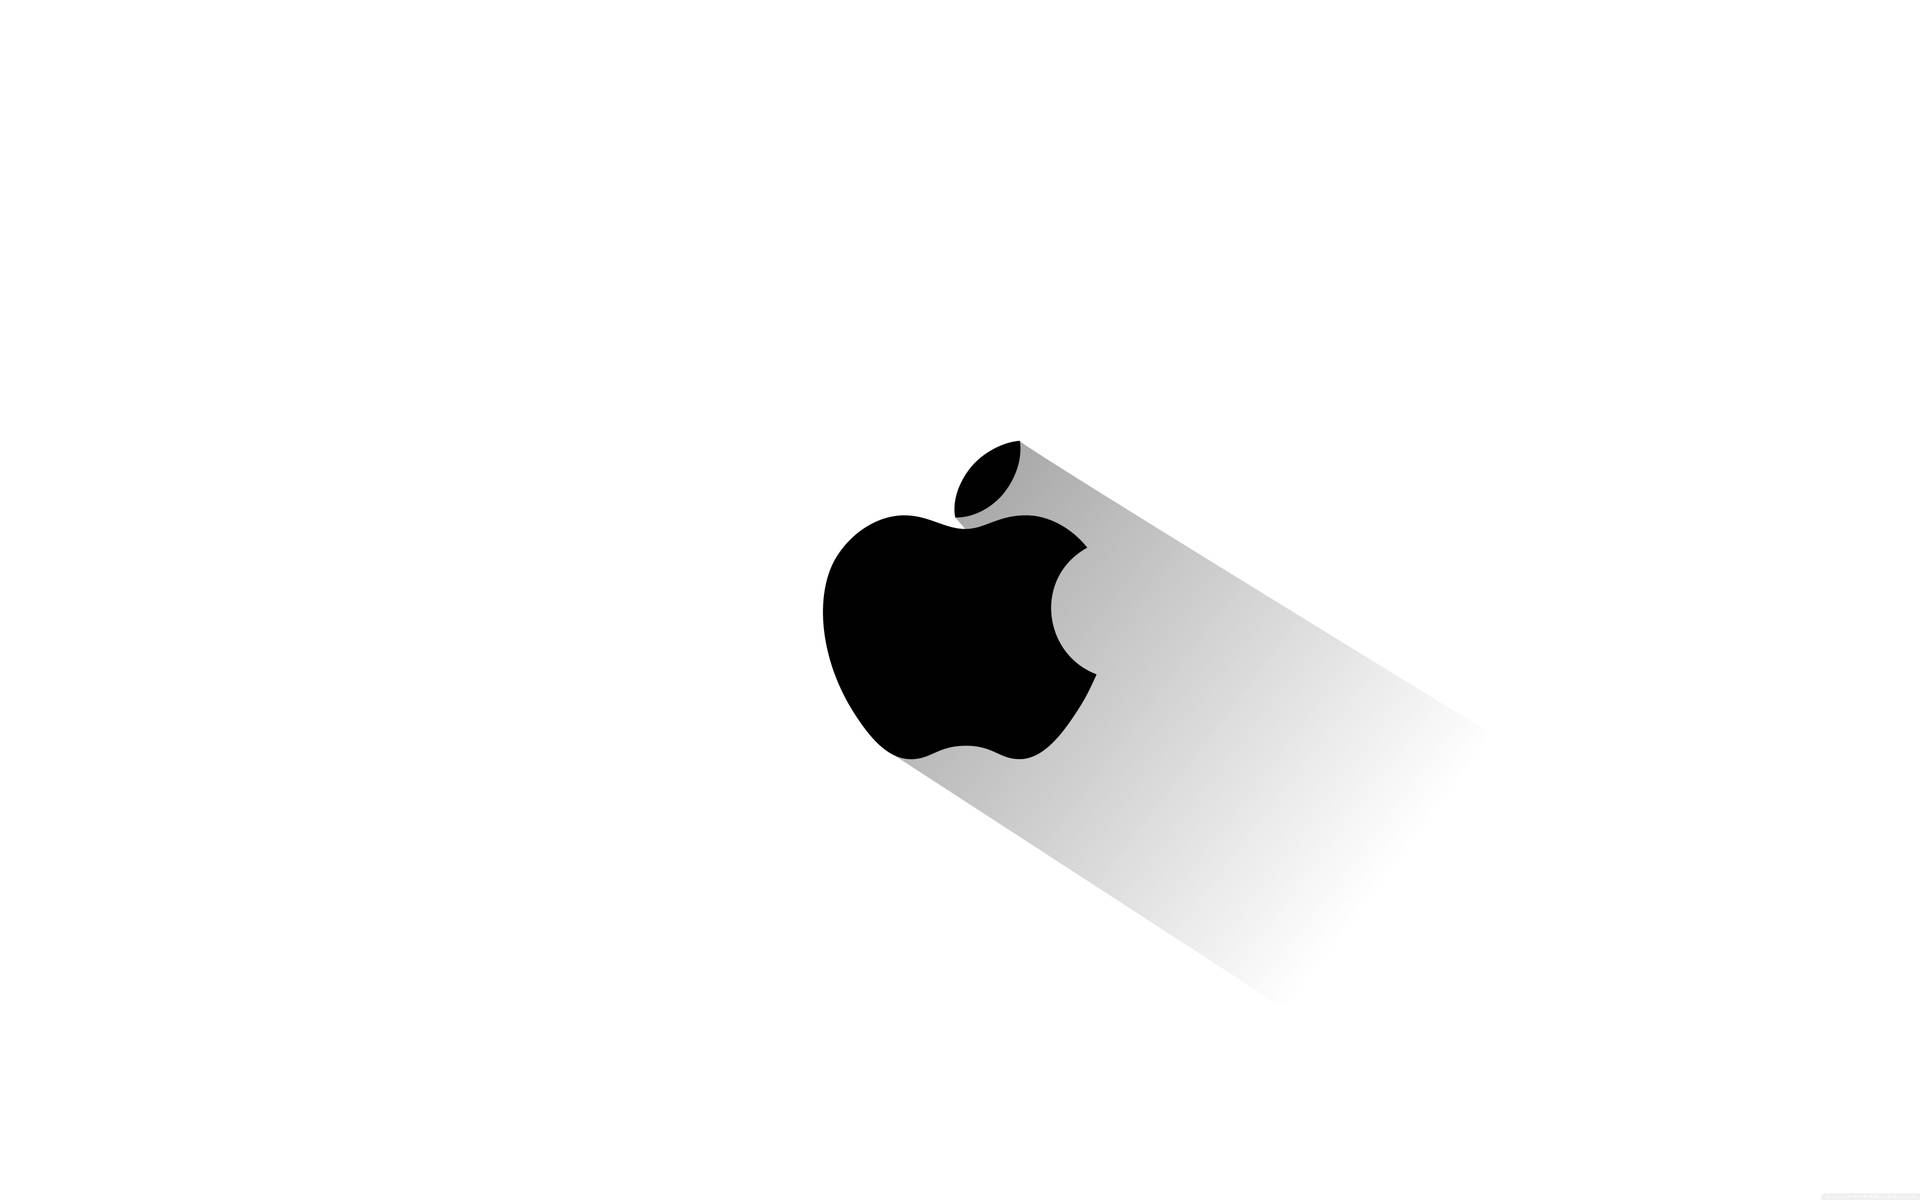 Black Apple Logo With Shadow On White Wallpaper